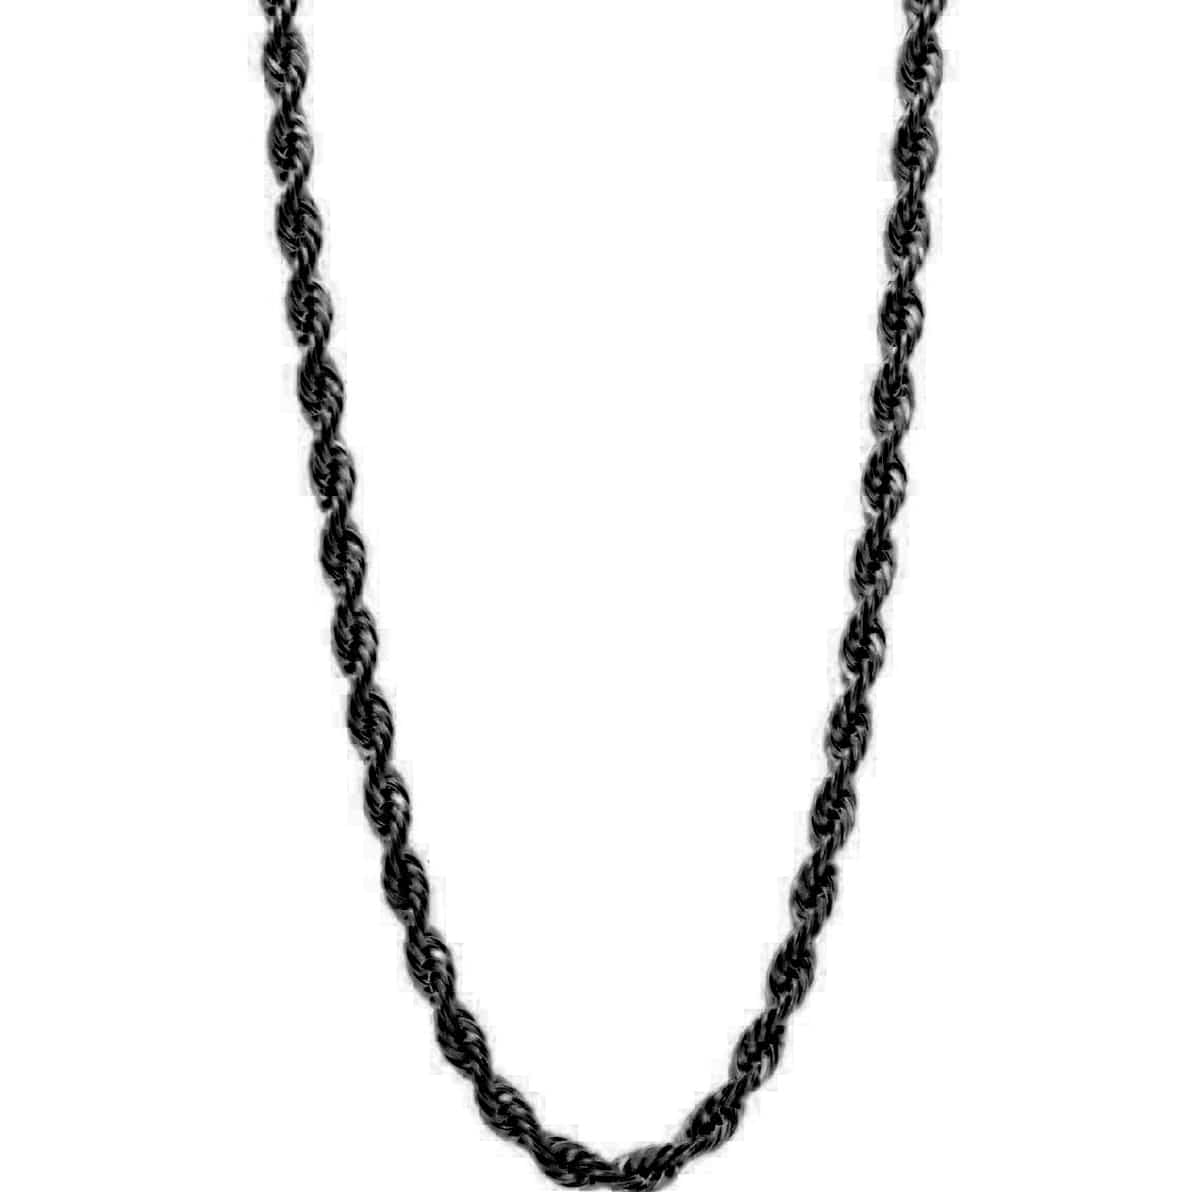 Mister Rope Chain - 3mm